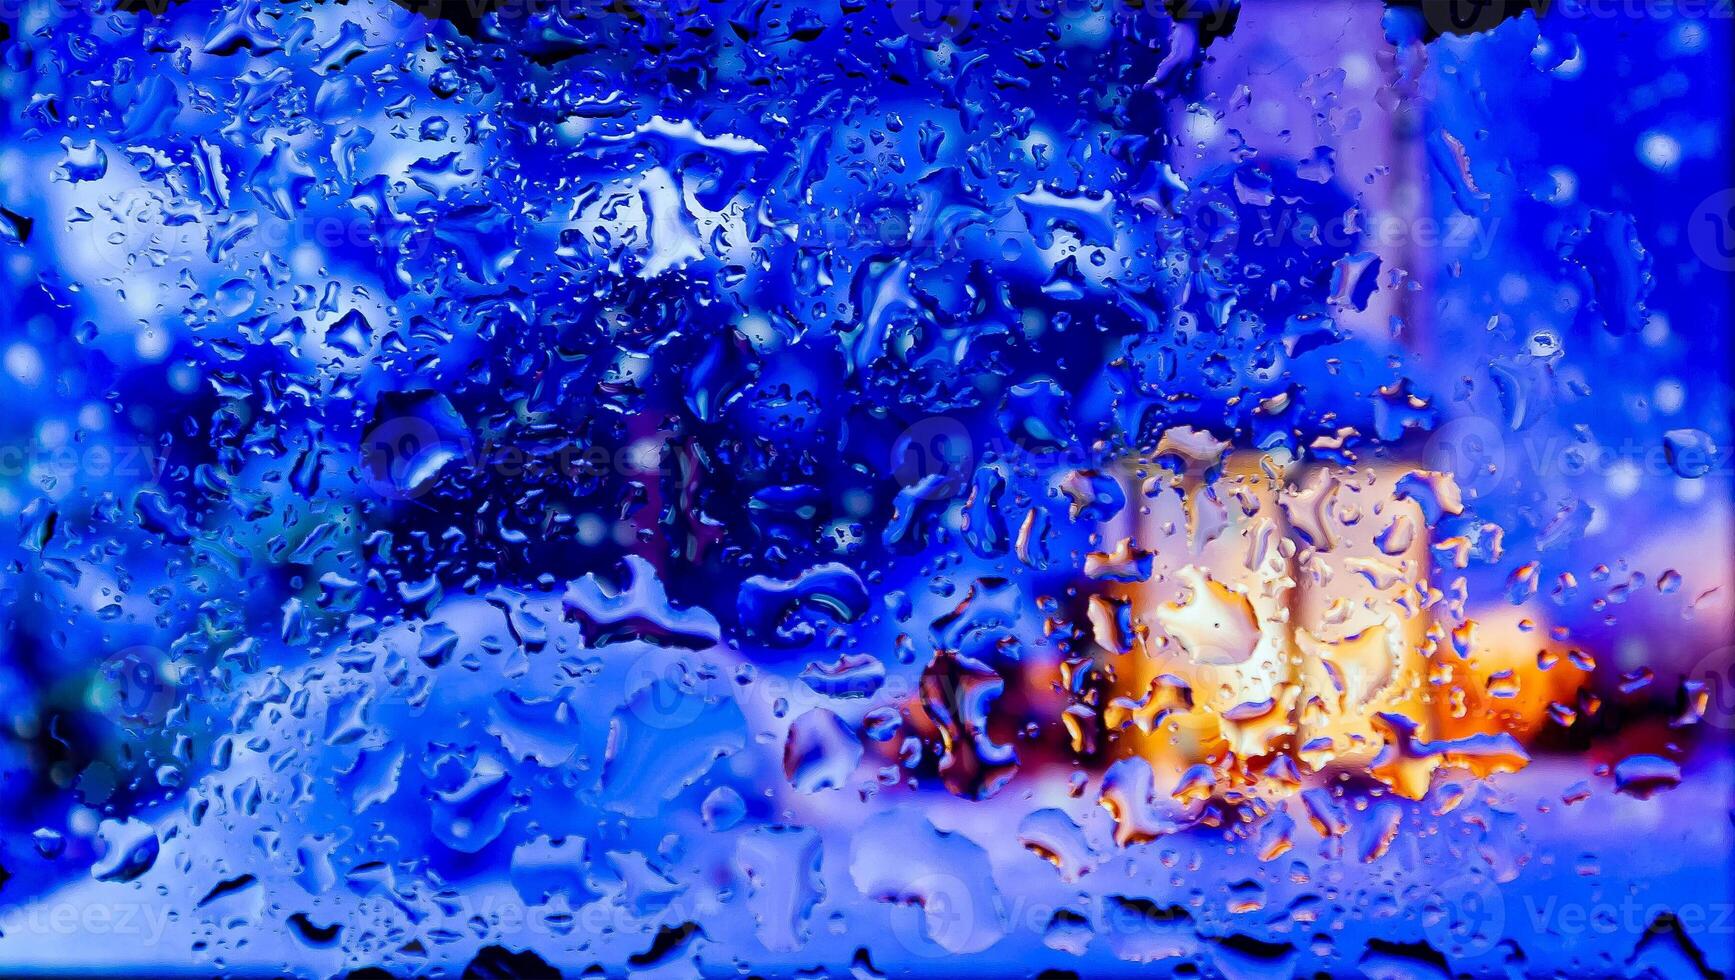 full hd abstract colorful background, abstract wallpaper with water drops, 4k colorful background, drops of water photo